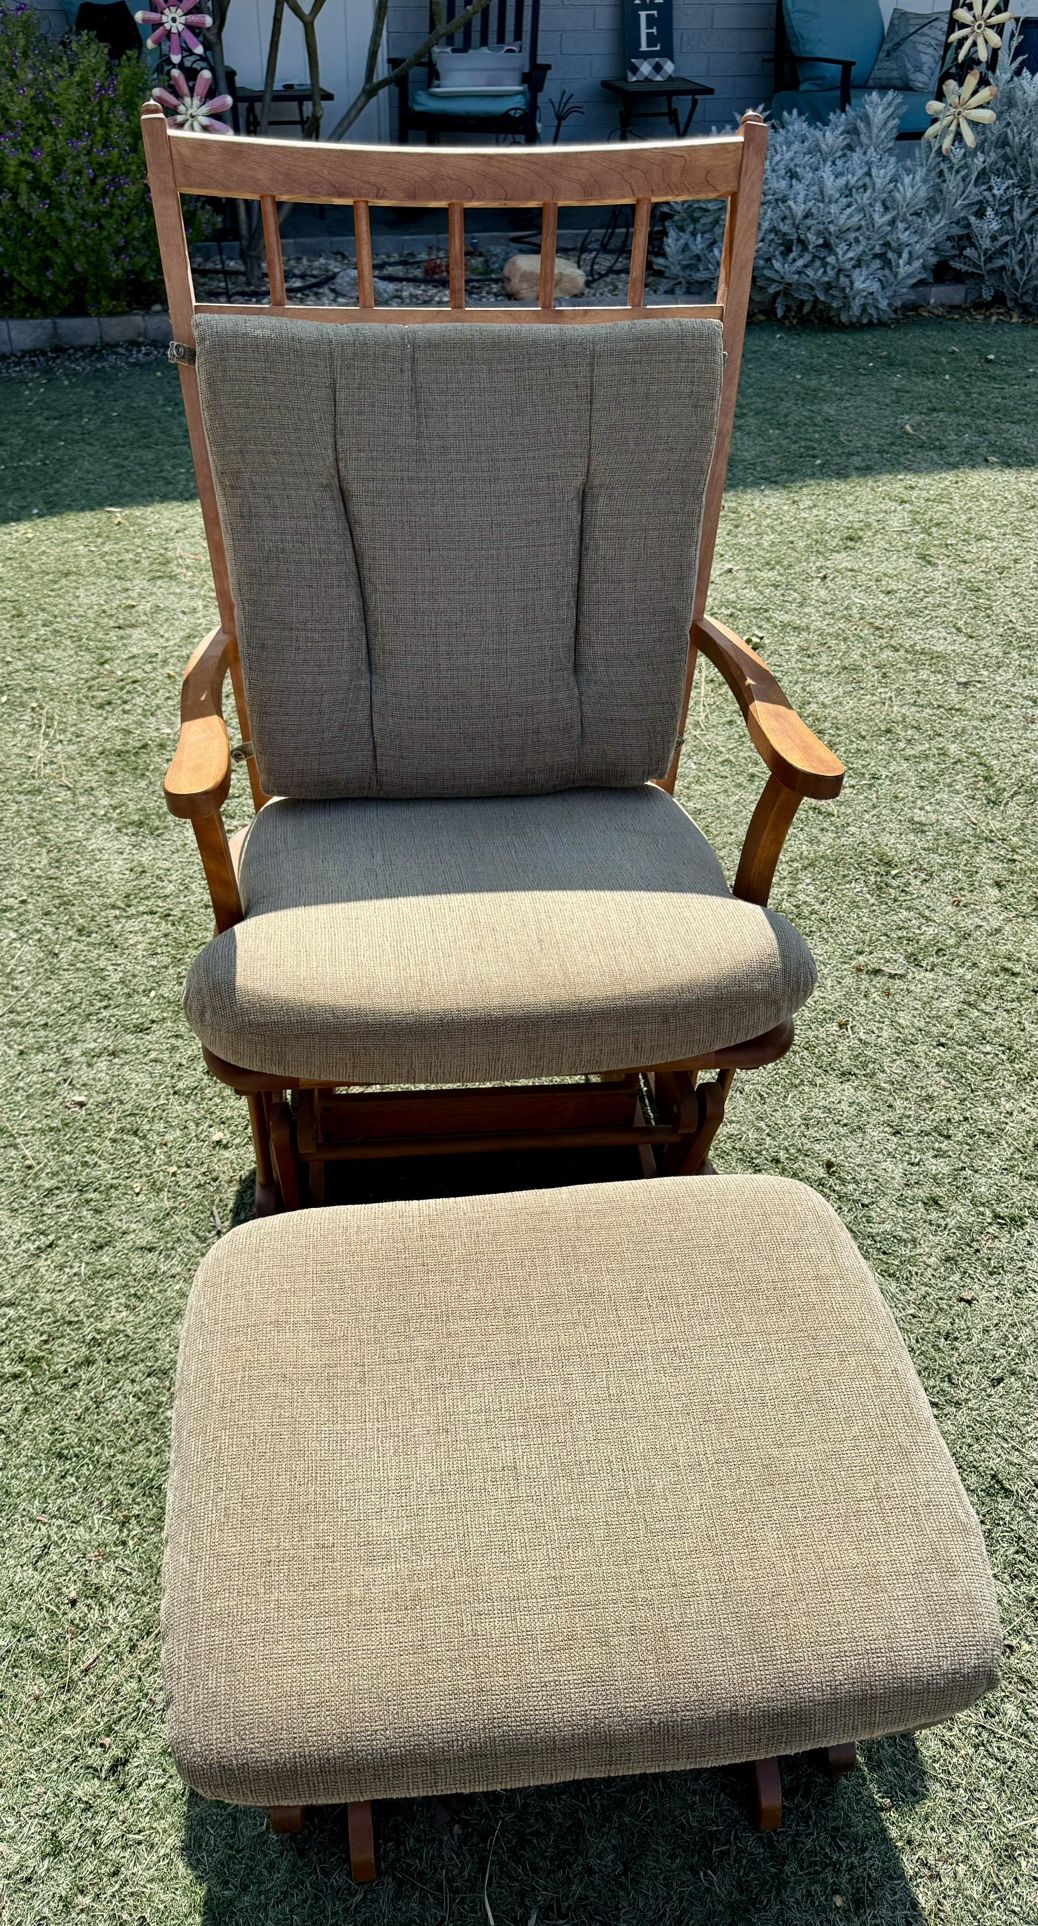 Padded Rocking Chair with Ottoman